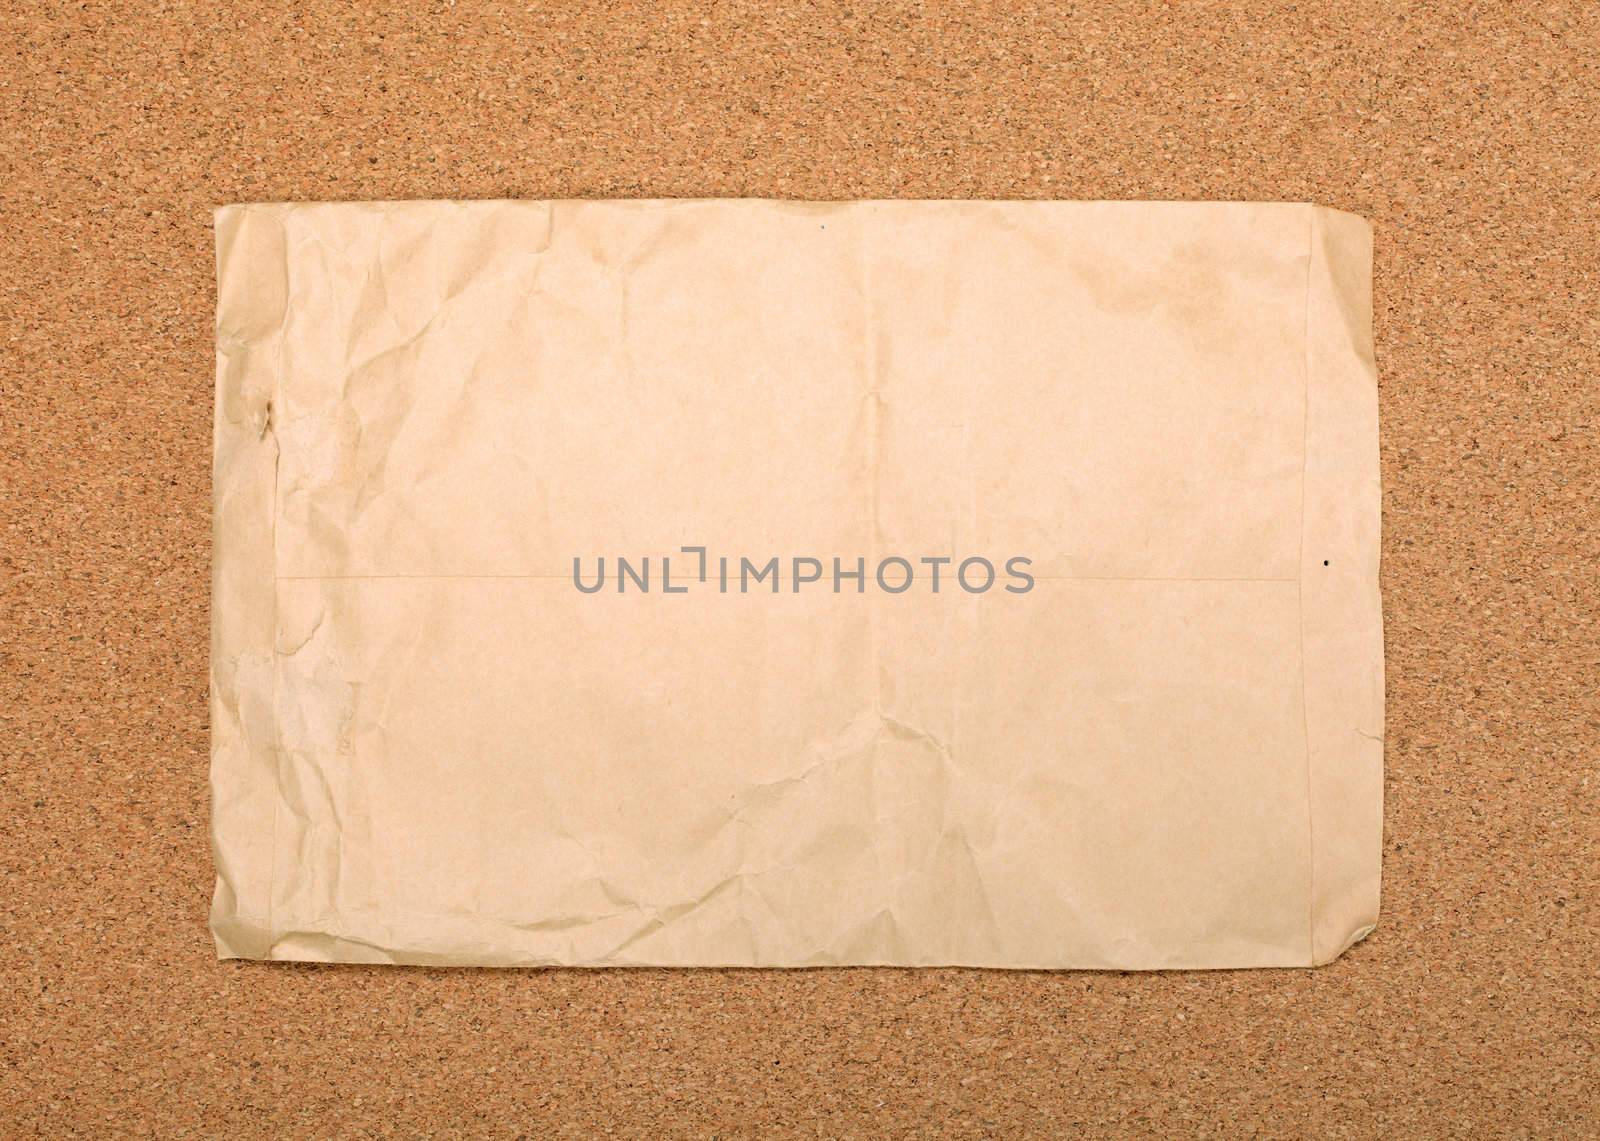 Wrinkled brown envelope attached to cork board. As backdrop or background.